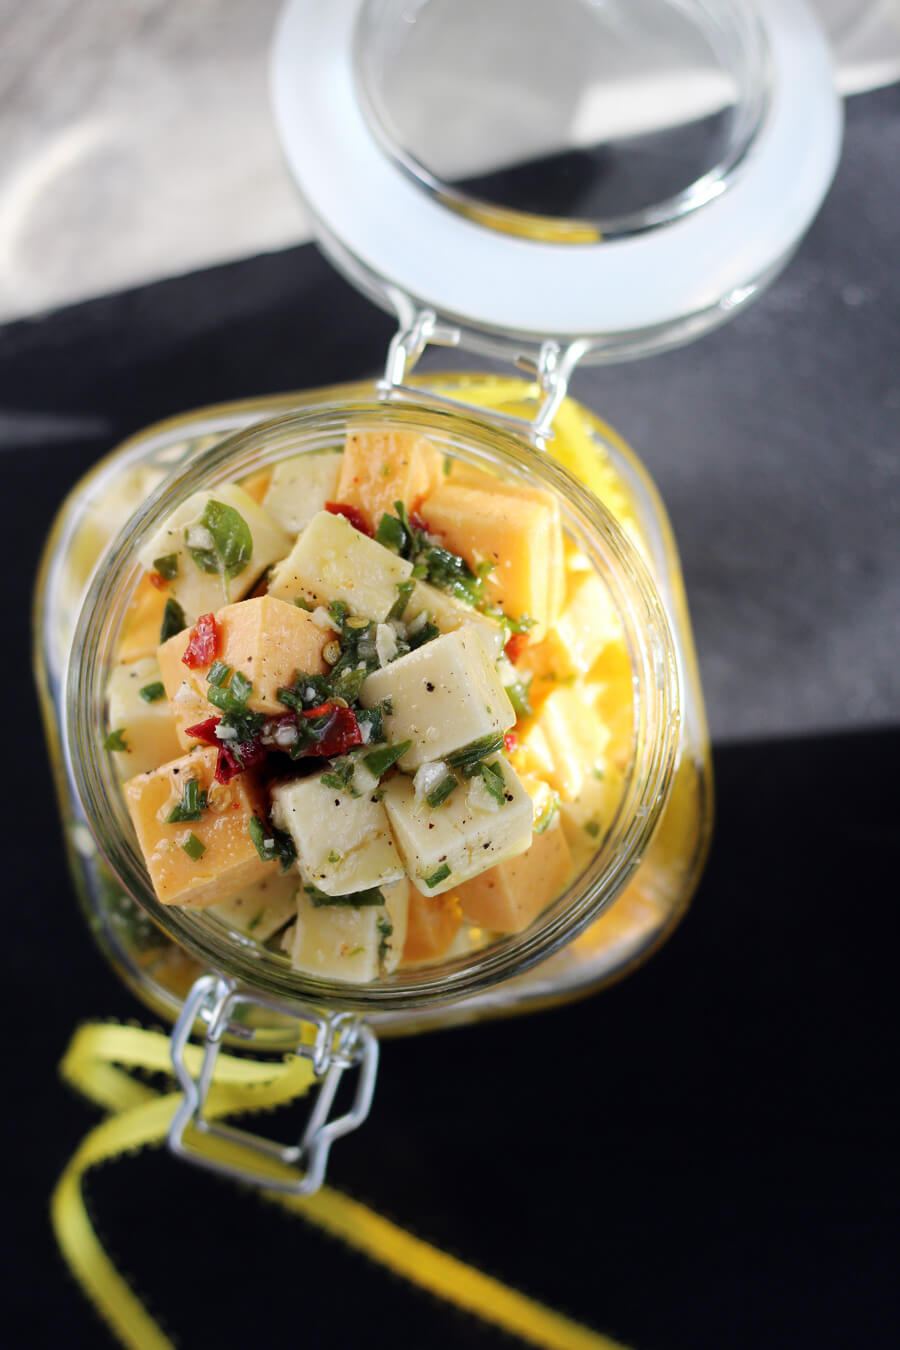 Marinated Cheddar Cheese Appetizer